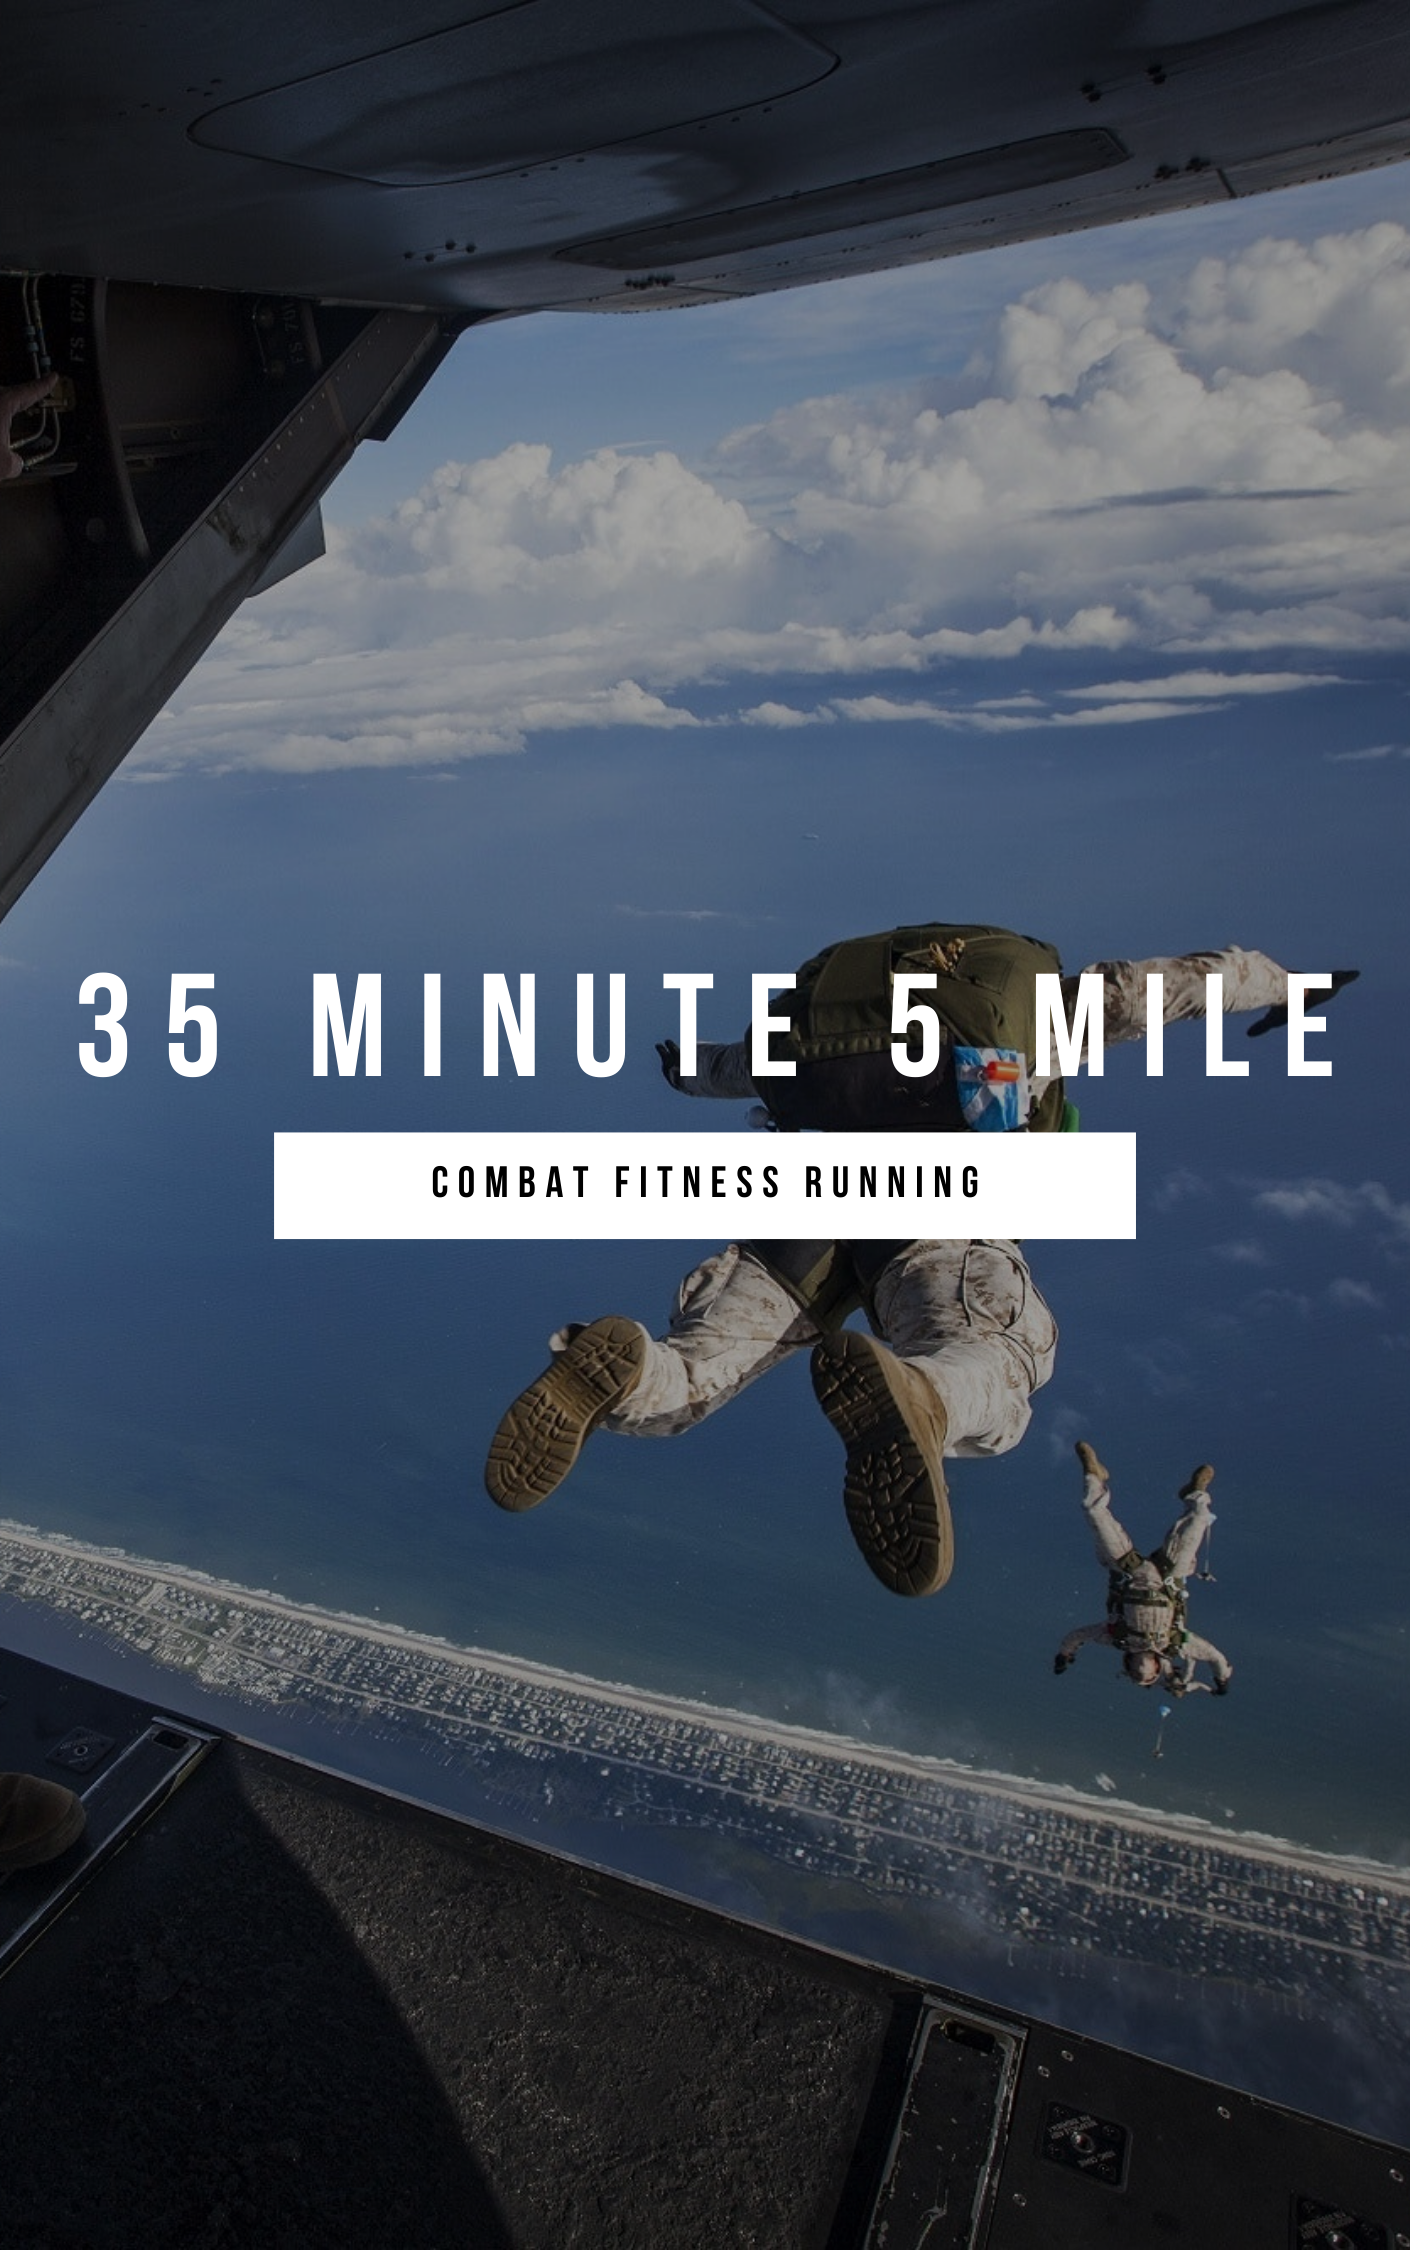 The 35 Minute 5 Mile - Combat Fitness